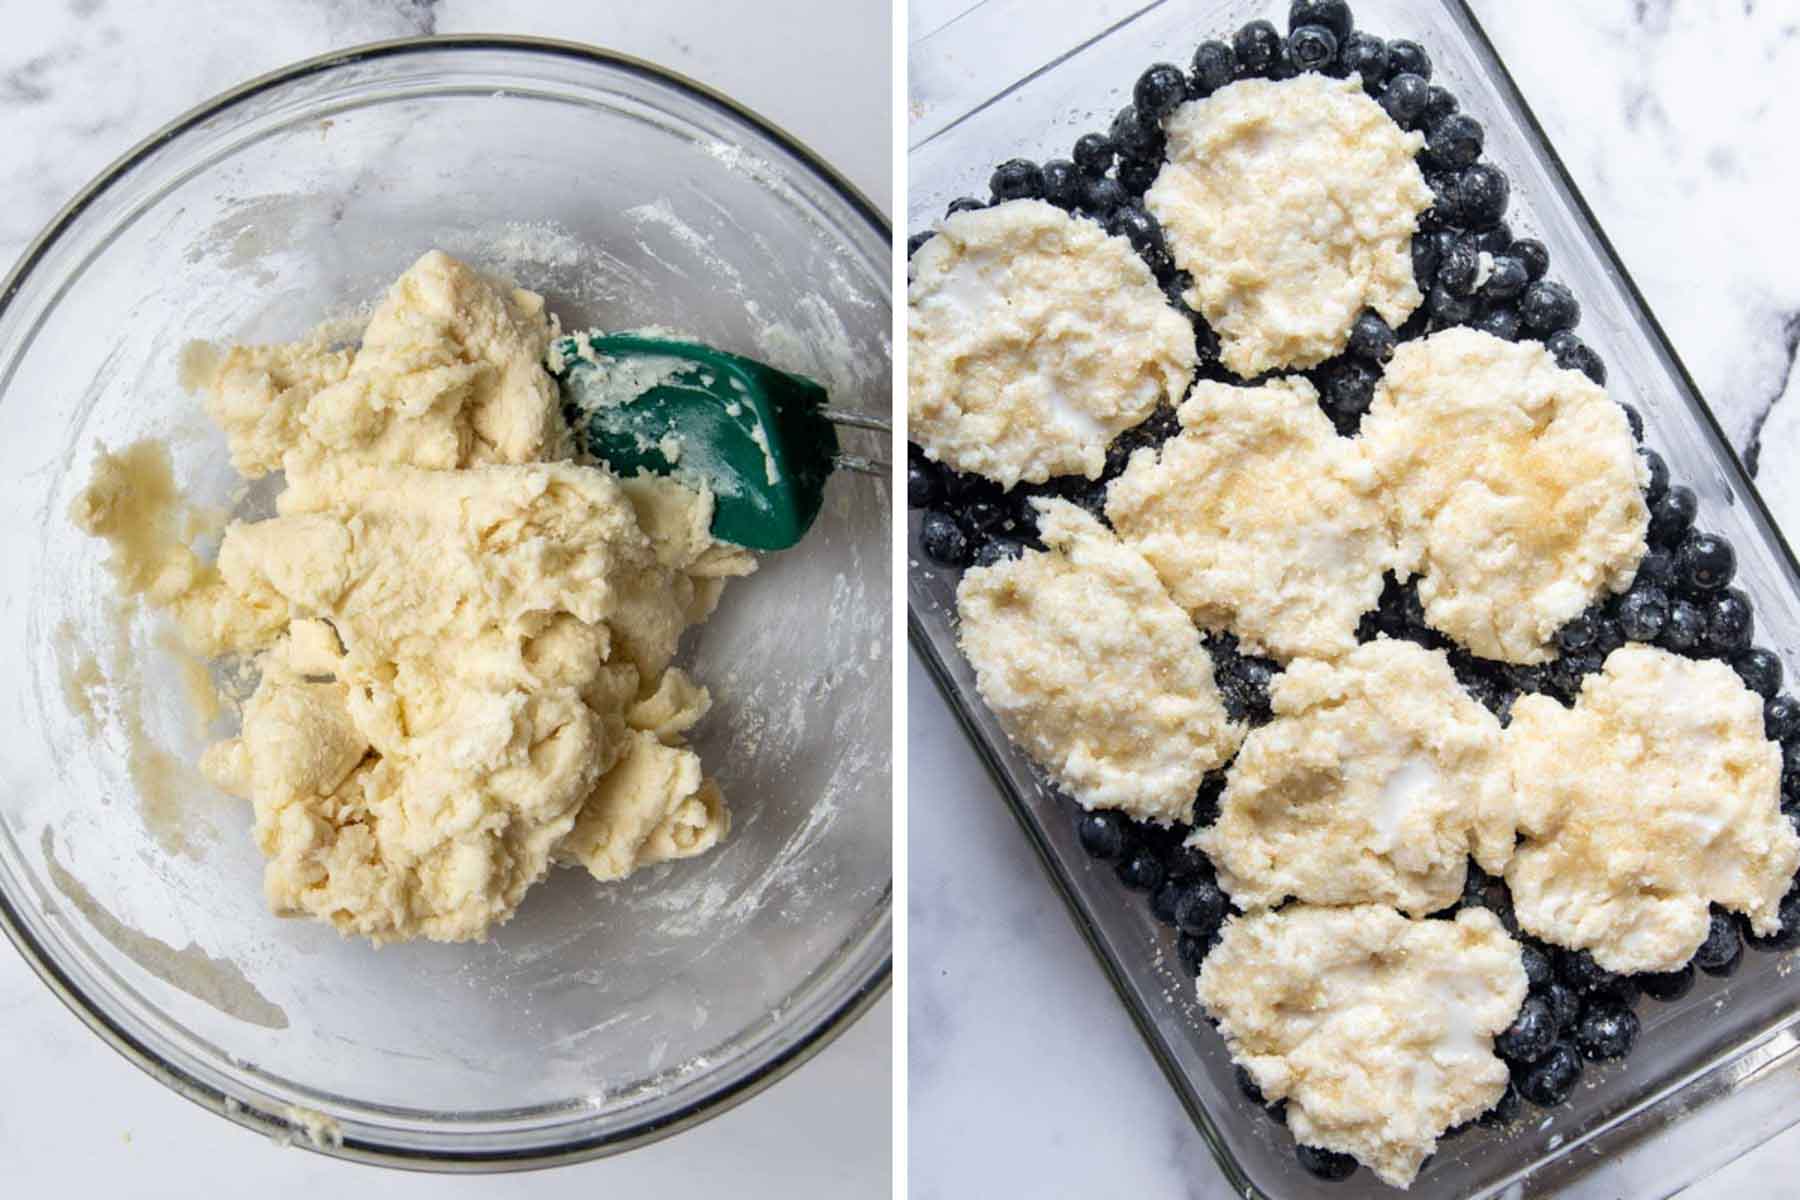 images showing dough being mixed and biscuit rounds on top of uncooked blueberries